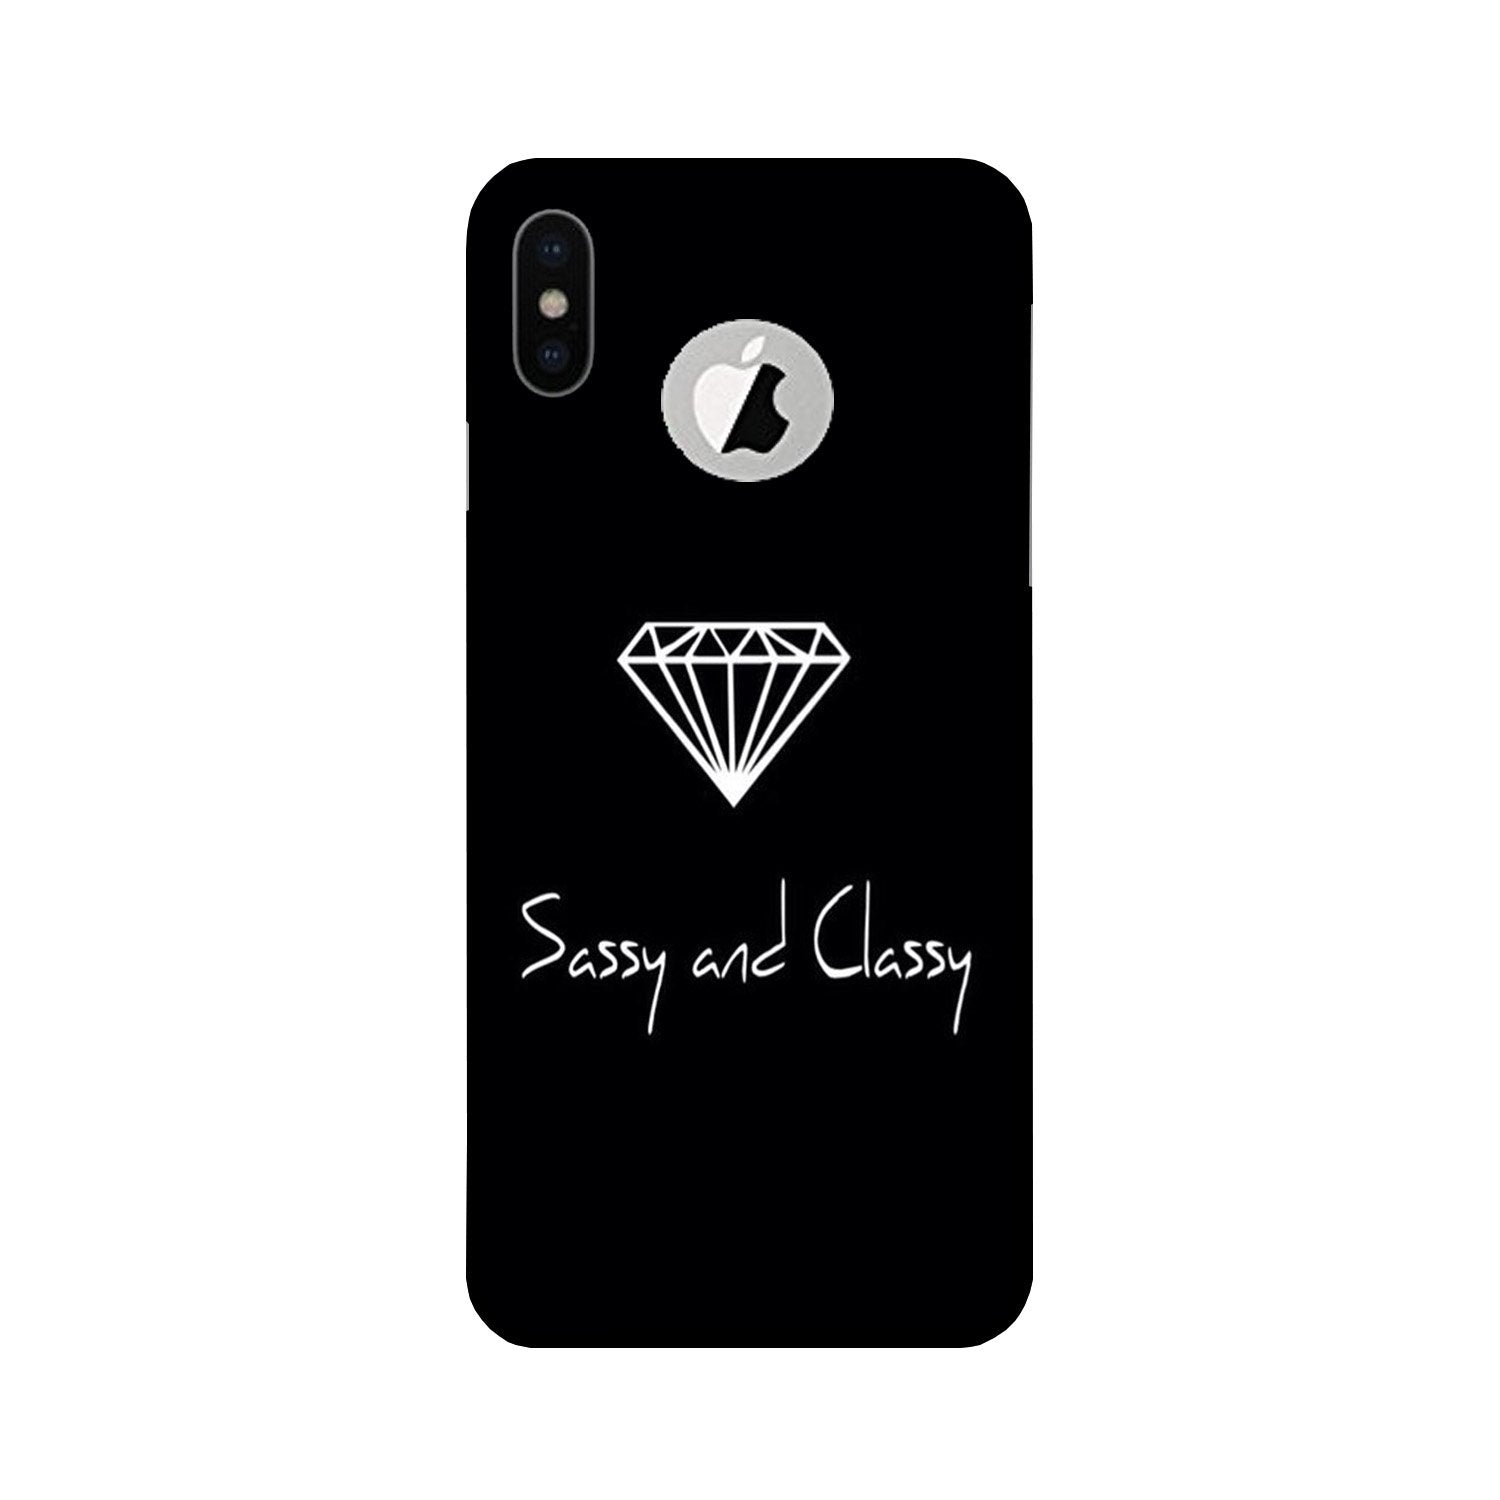 Sassy and Classy Case for iPhone X logo cut (Design No. 264)